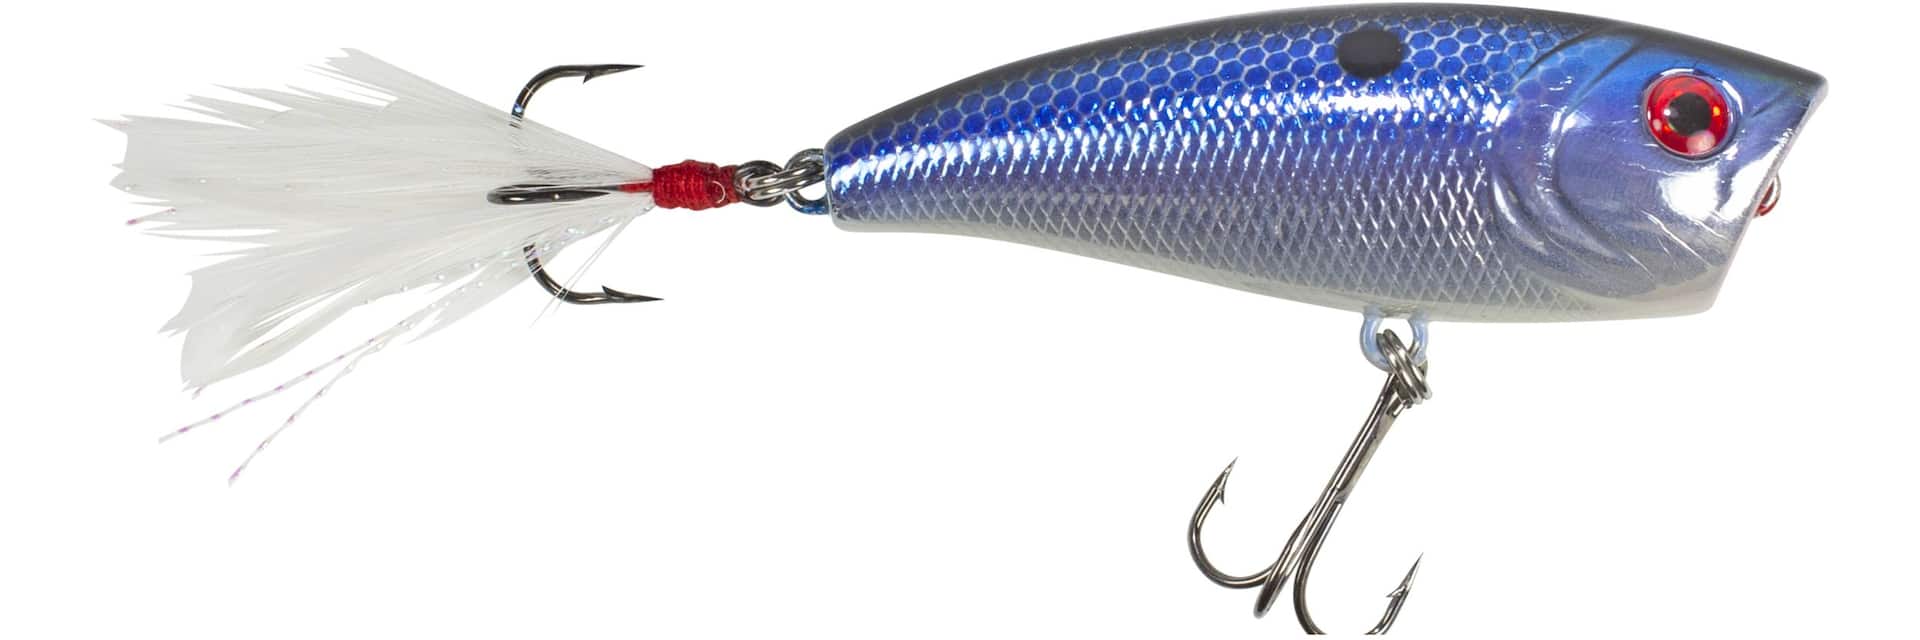 Fishing Lures for sale in Windsor, Ontario